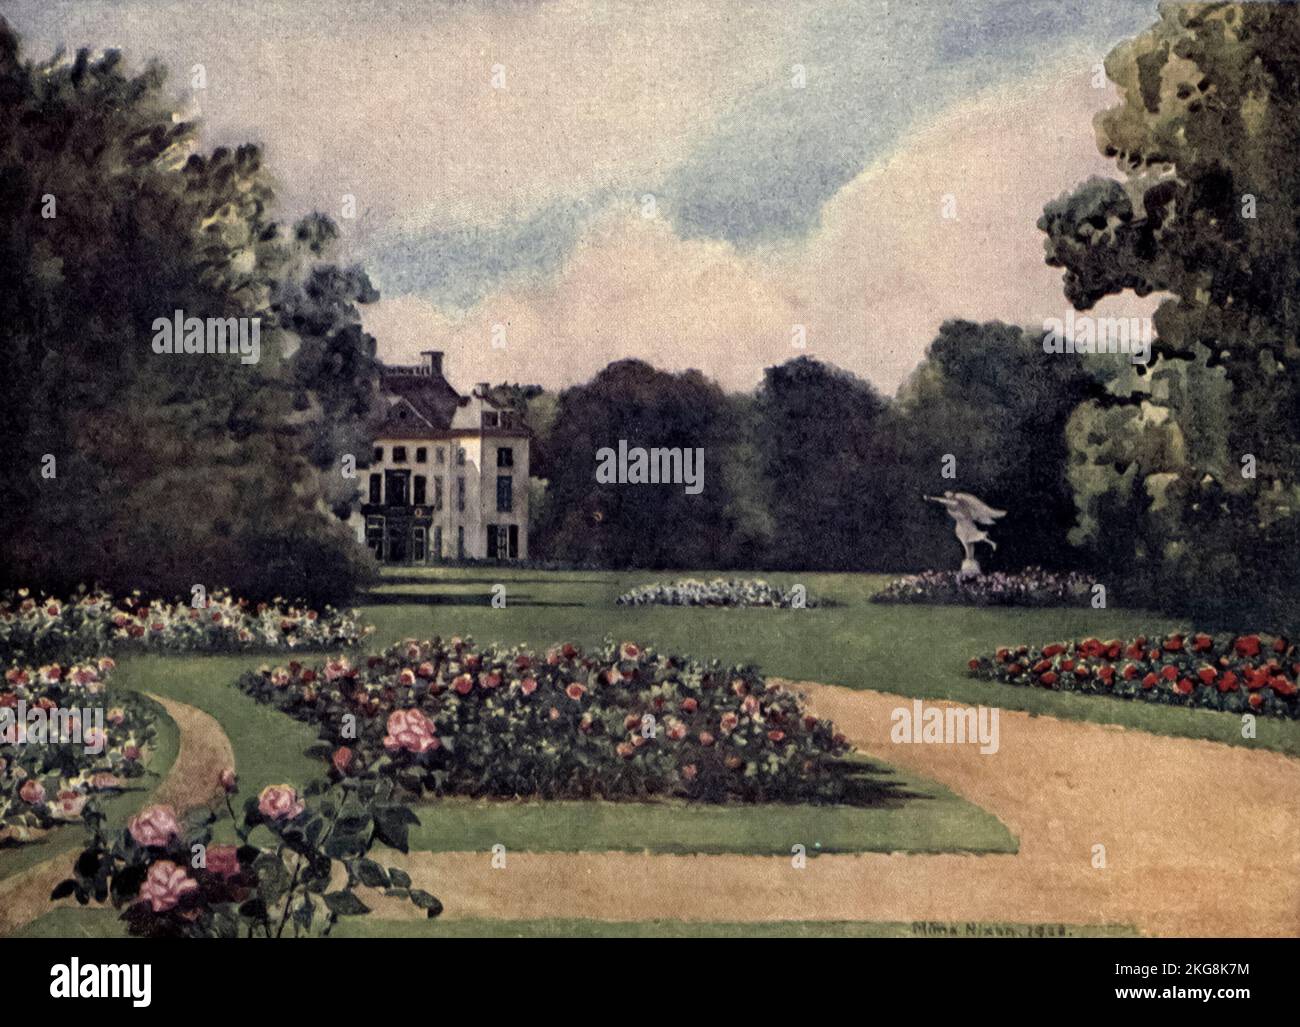 Het Loo - Frontispiece Het Loo Palace is a palace in Apeldoorn, Netherlands, built by the House of Orange-Nassau. Painted by Mima Nixon, from the book ' Dutch bulbs and gardens ' by Silberrad, Una Lucy, Publication date 1909 Publisher London : A. and C. Black Stock Photo